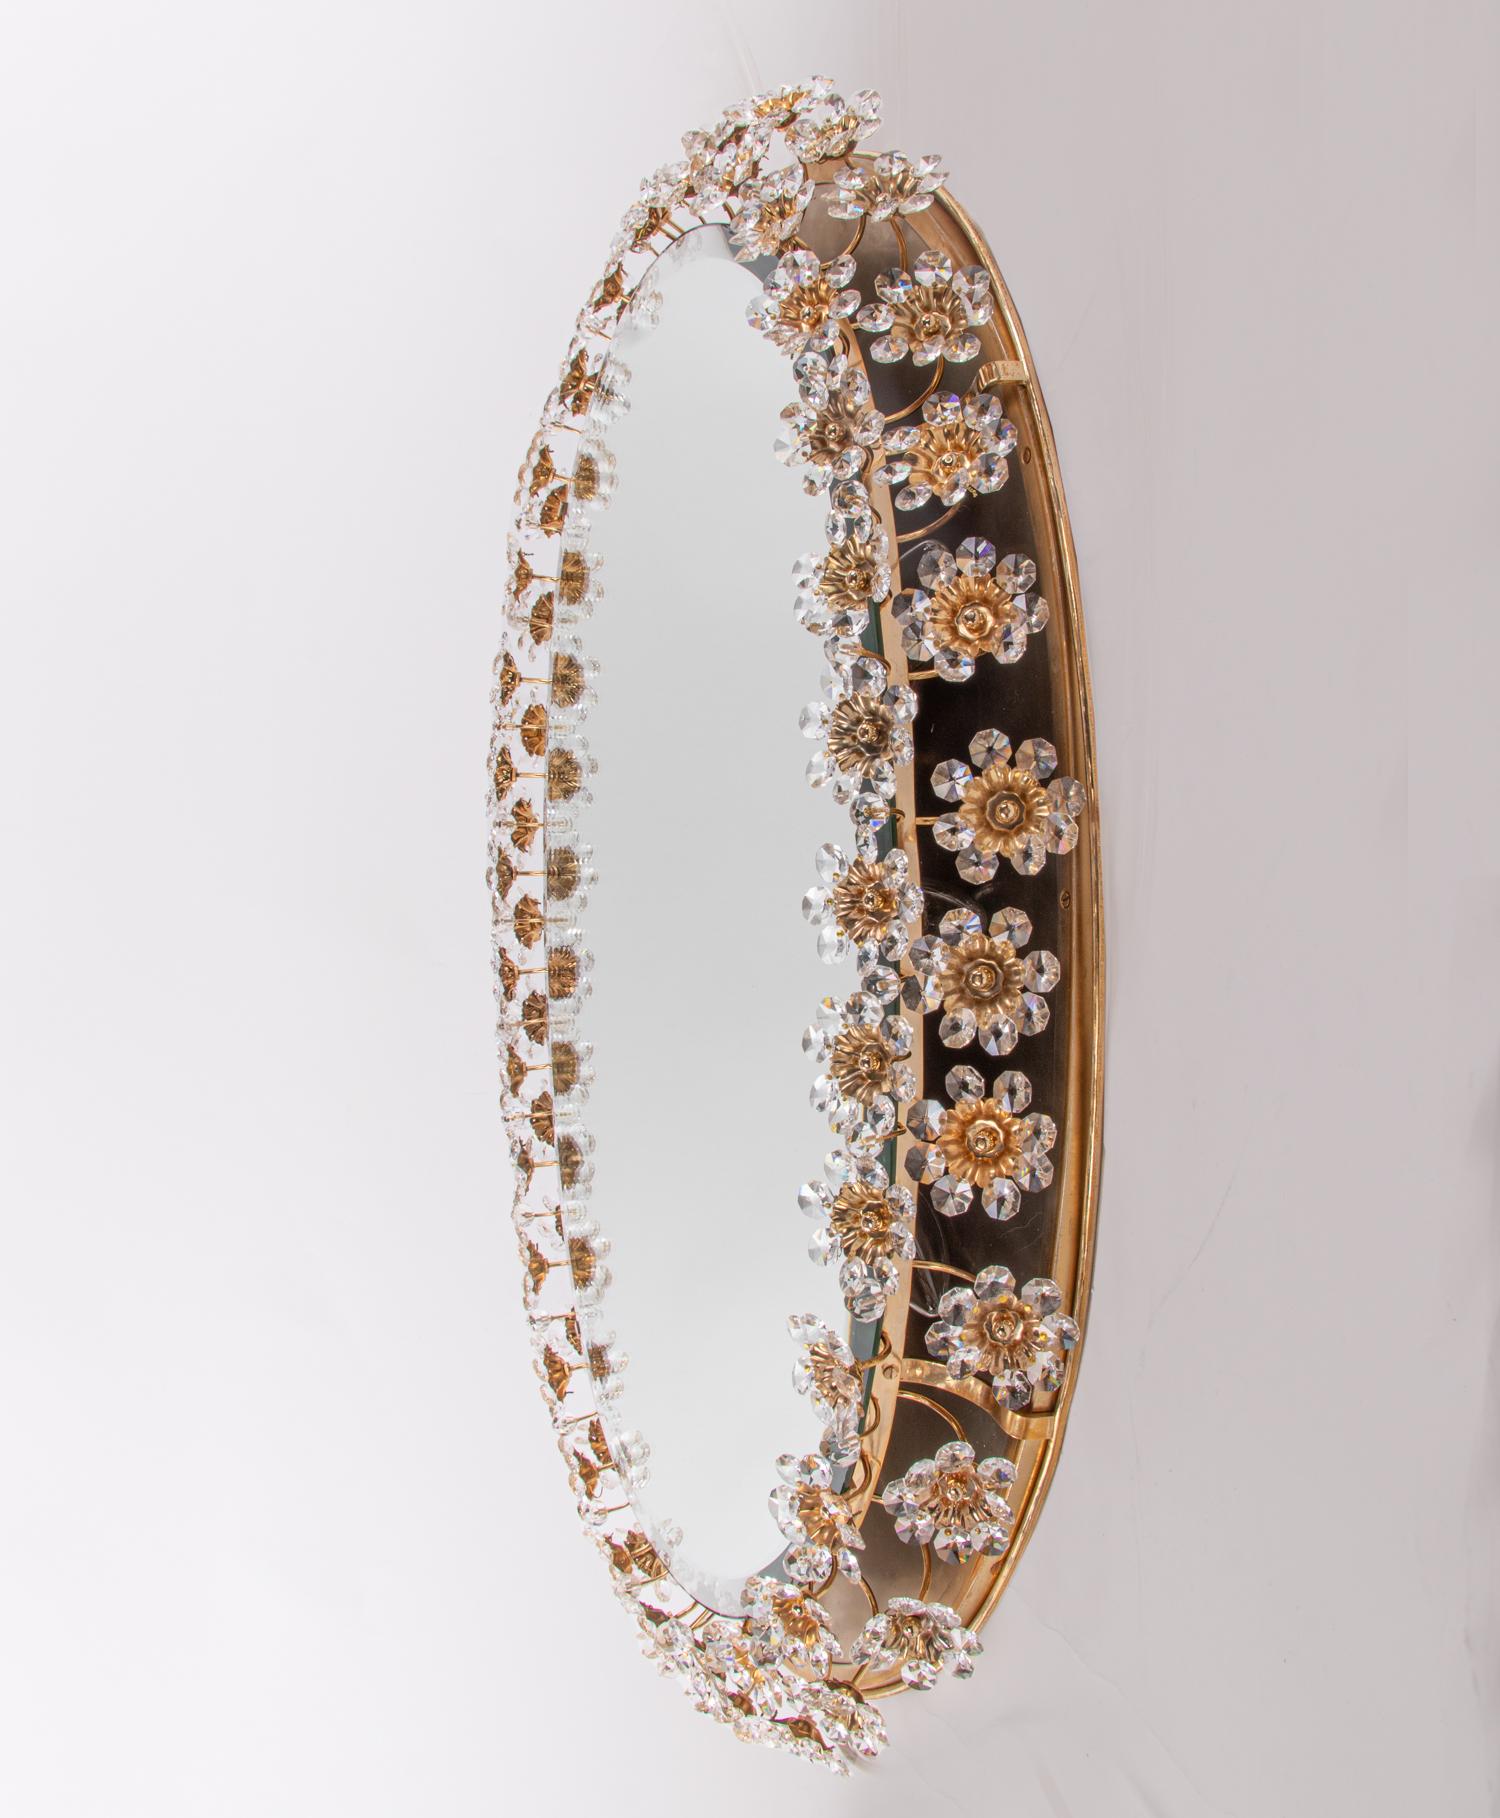 Elegant large illuminated oval backlit mirror with faceted crystals forming petals and flowers on a gilded brass frame. Desinged by Christoph Palme attr. Manufactured by Palwa, Germany, 1960s. 

Design: Christoph Palme attr. 
Manufacturer: Palwa